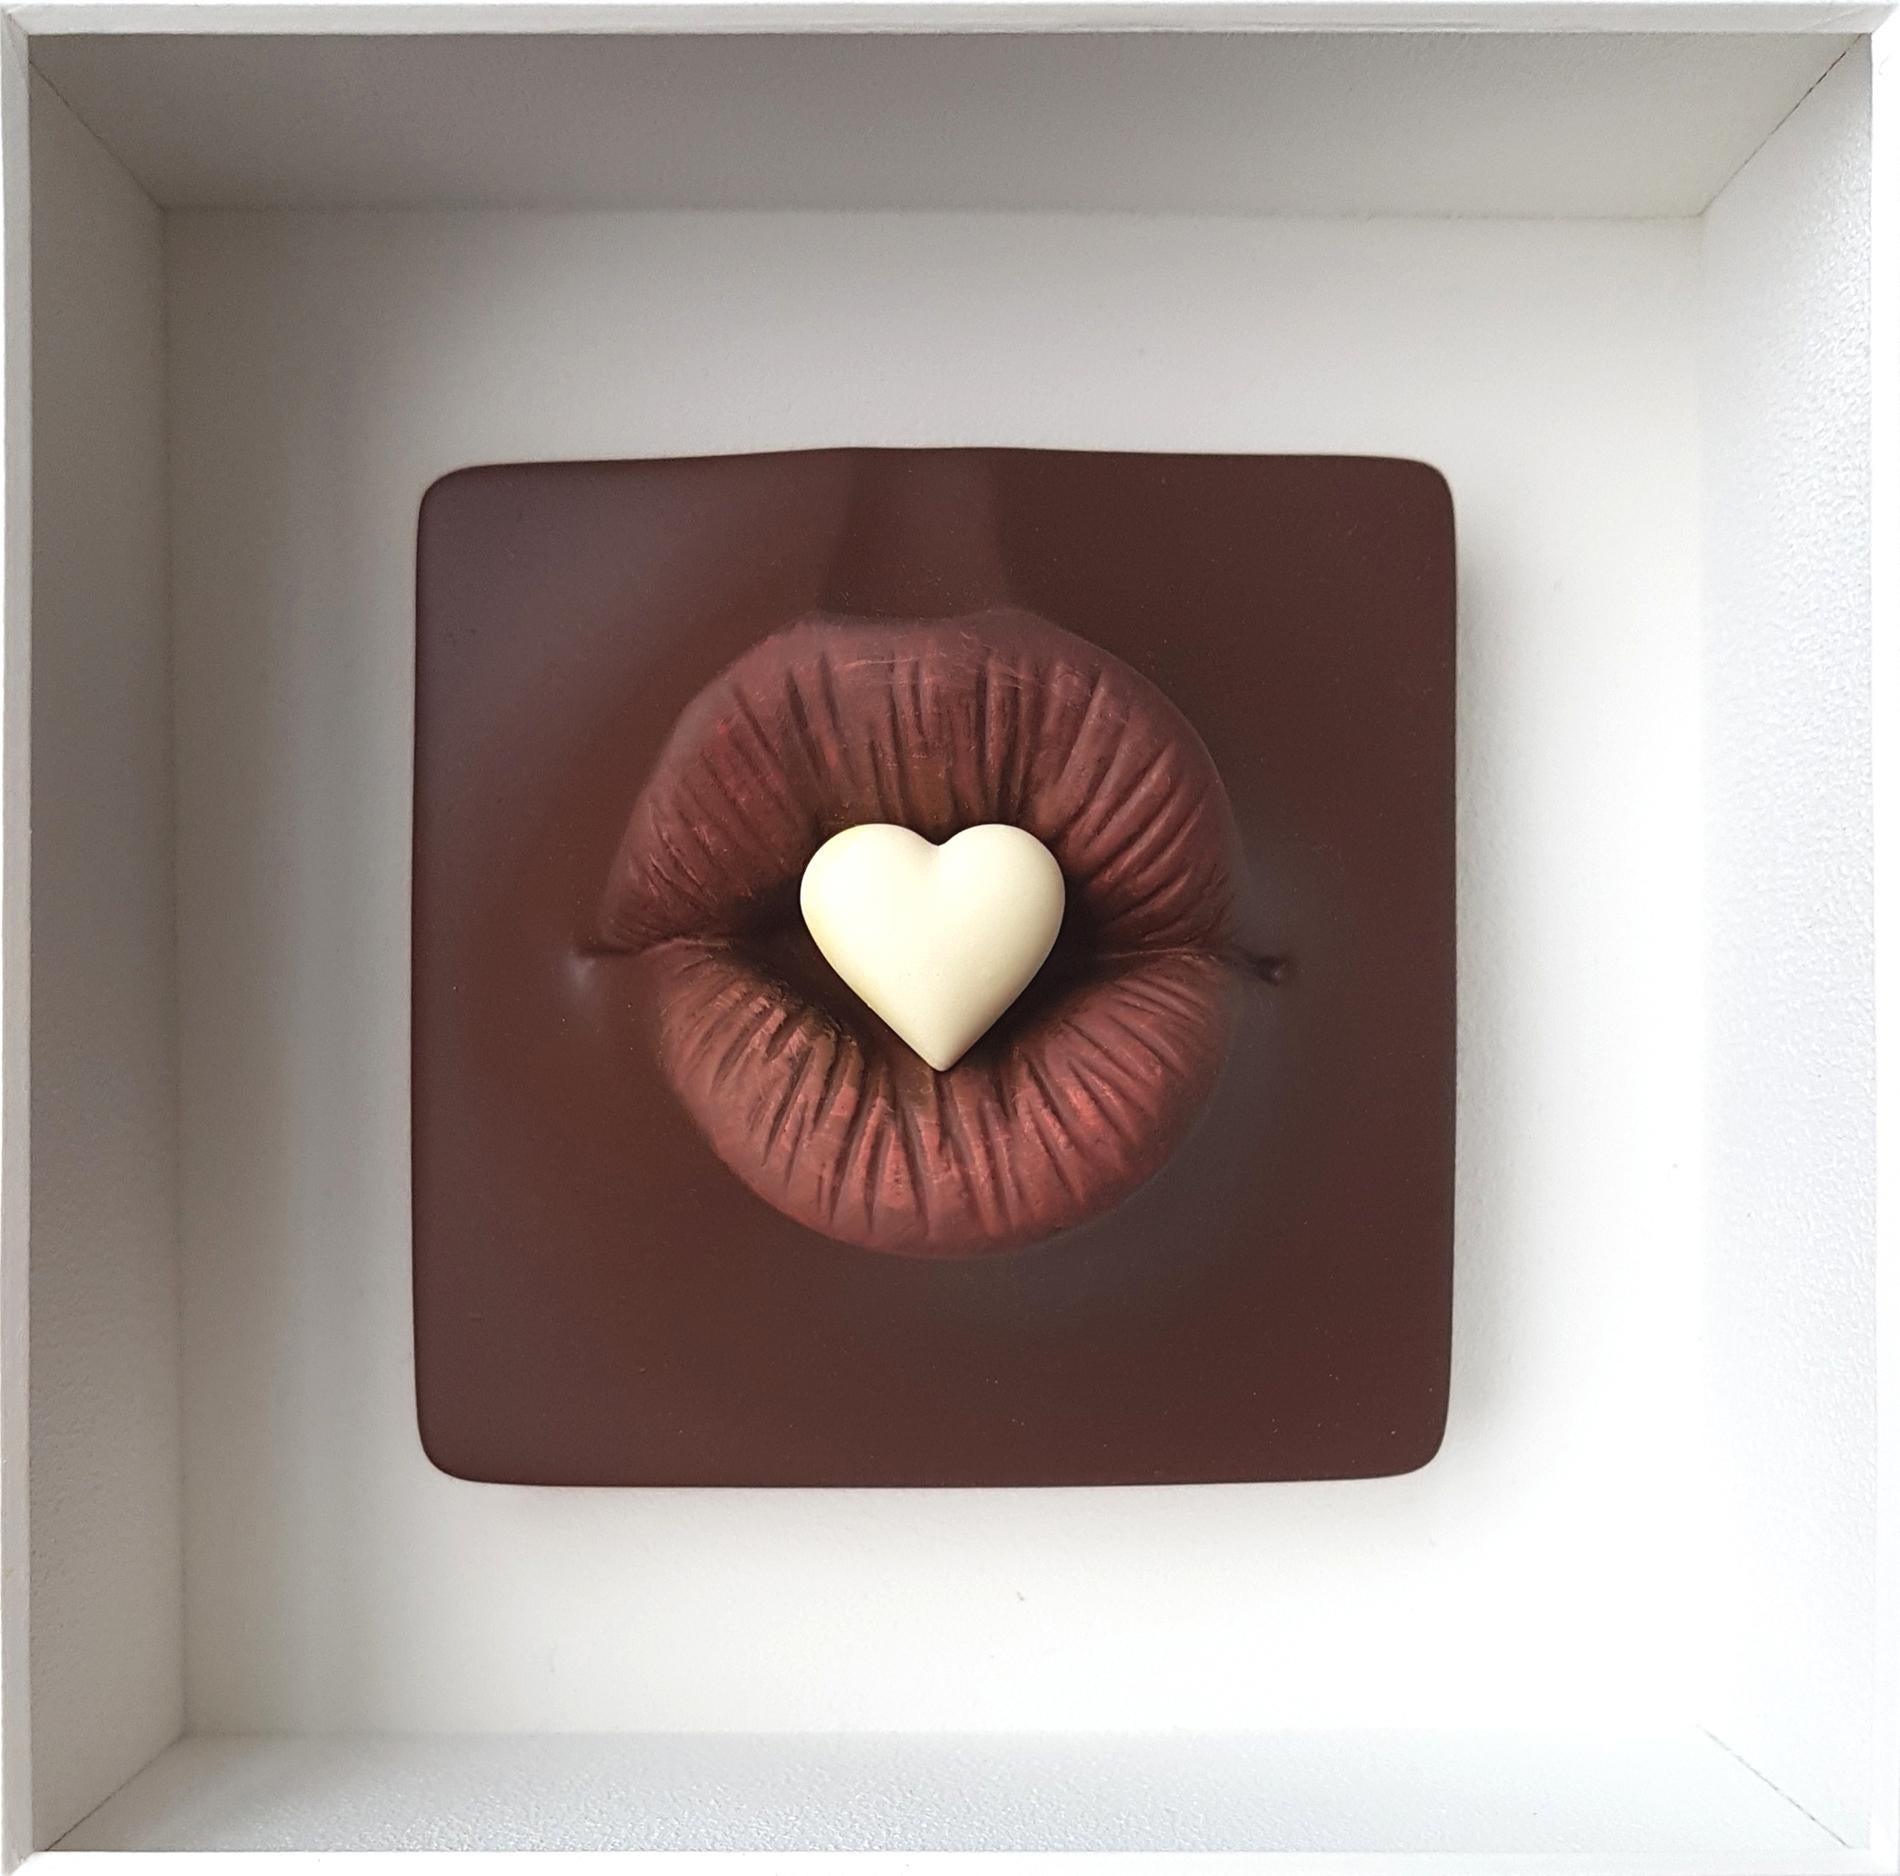 Chocolate Kiss - contemporary art in boxes artwork by Volker Kuhn, minimalist 